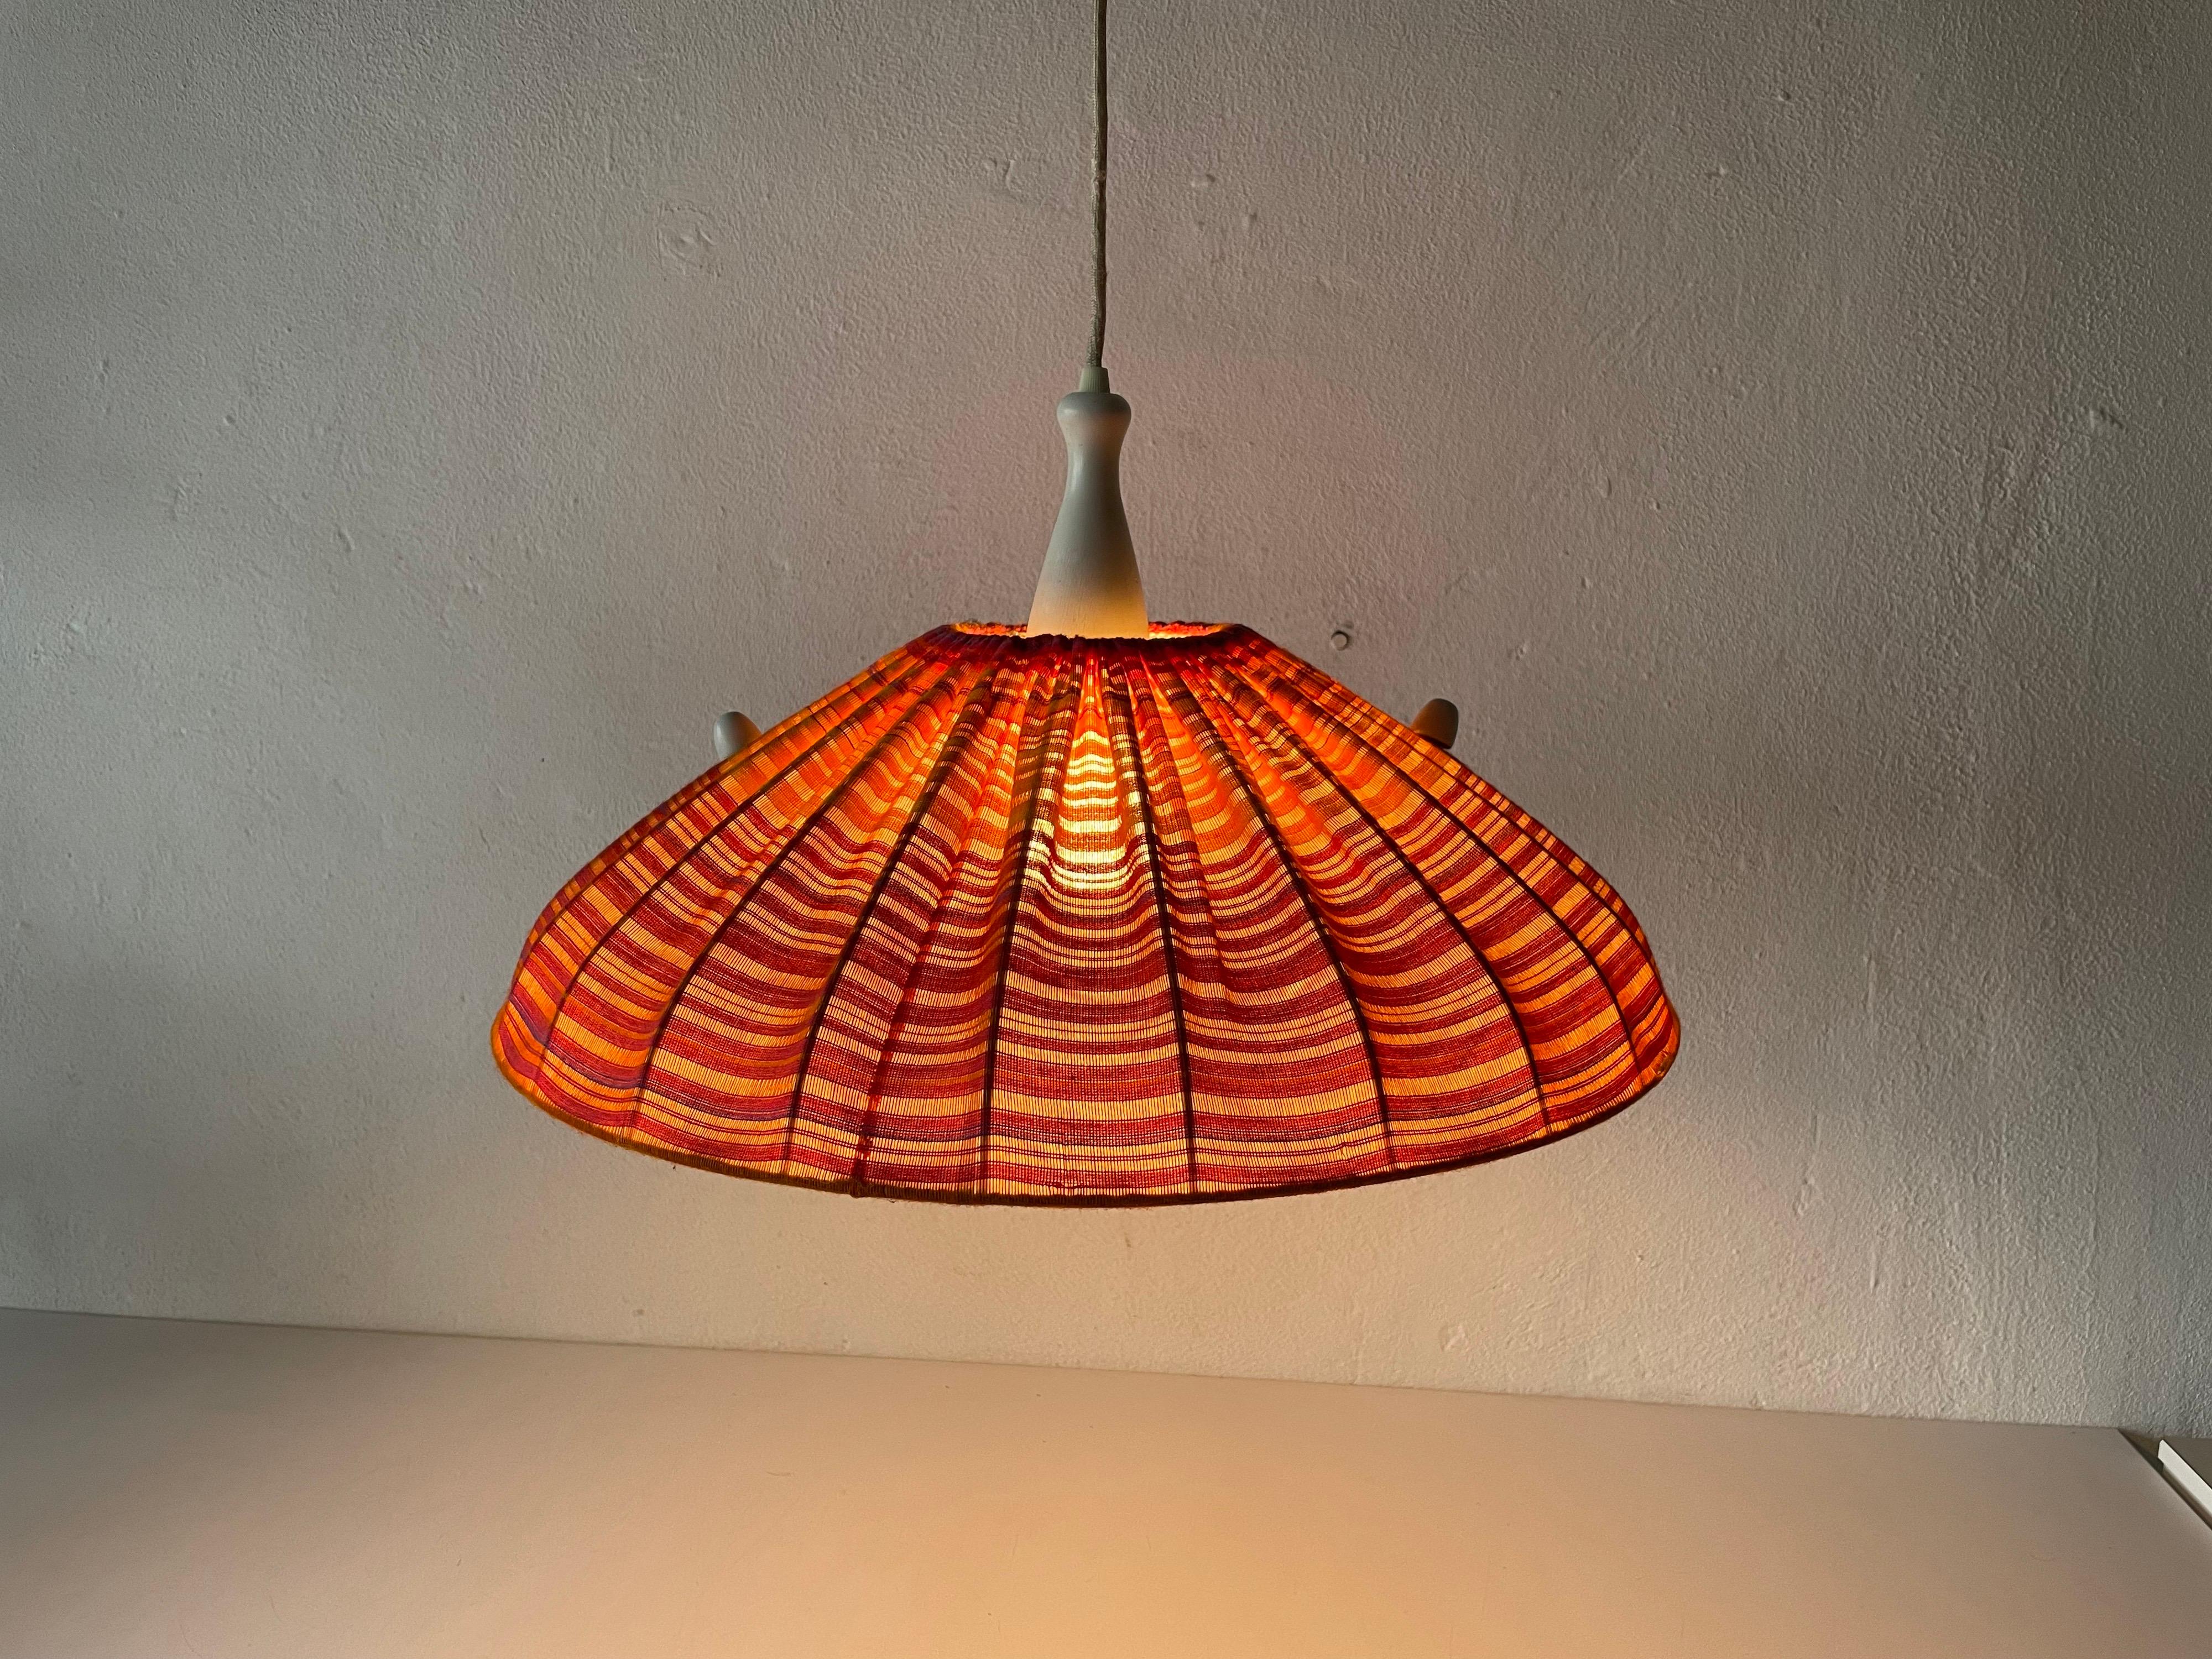 Fabric Shade & Wood Large Pendant Lamp by Temde, 1960s, Germany For Sale 5